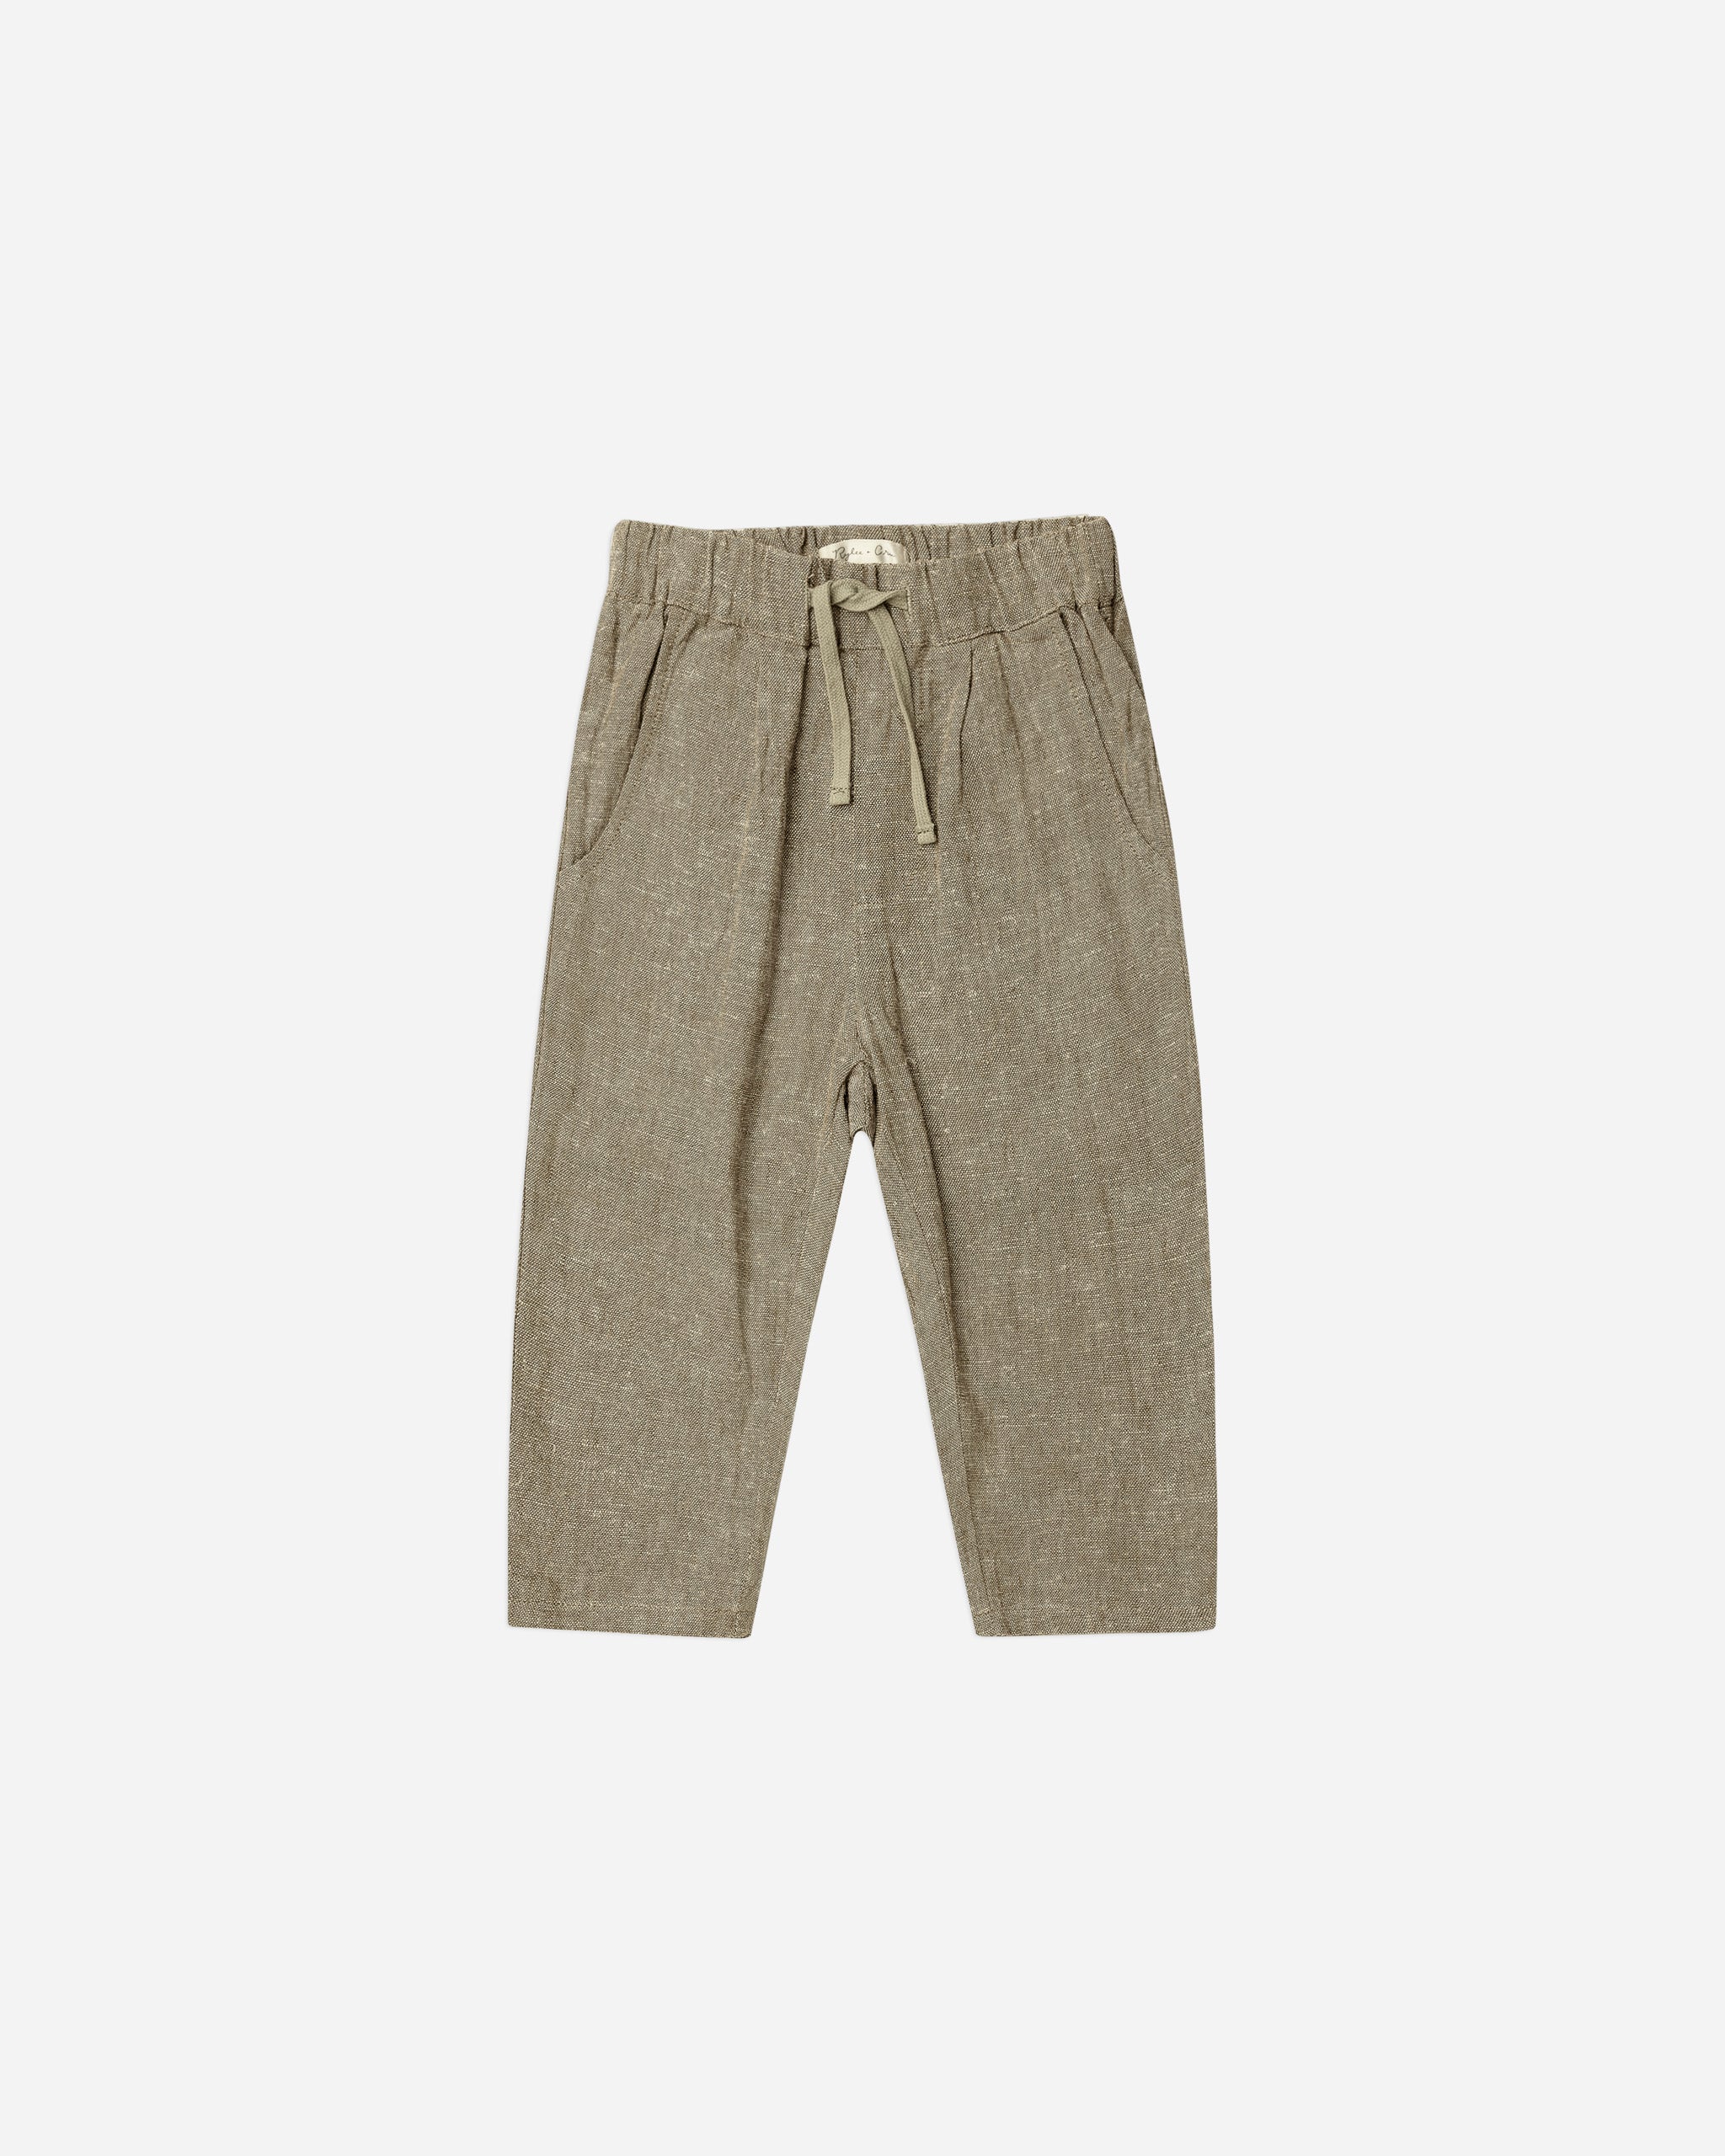 ethan trouser || olive - Rylee + Cru | Kids Clothes | Trendy Baby Clothes | Modern Infant Outfits |